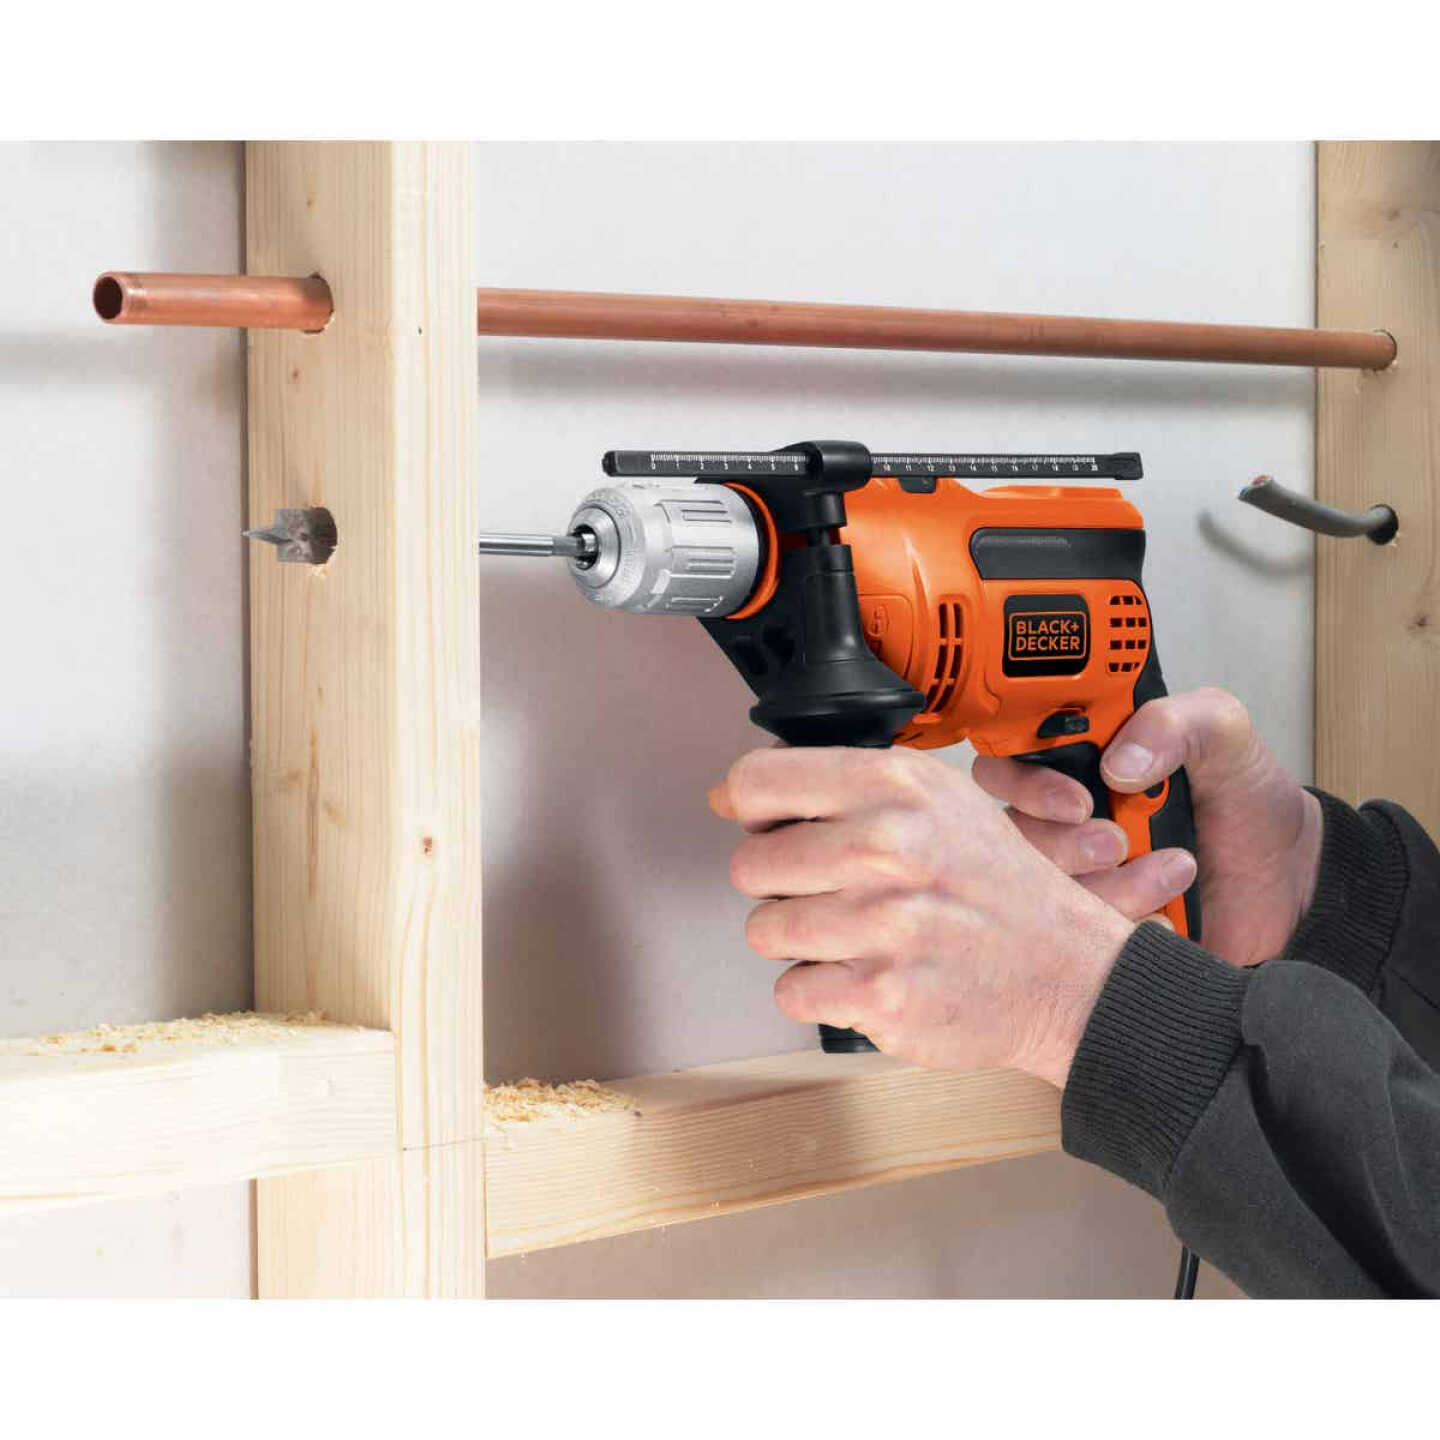 Black and Decker 1/2 In. Keyless 6.5-Amp VSR Electric Hammer Drill Image 2